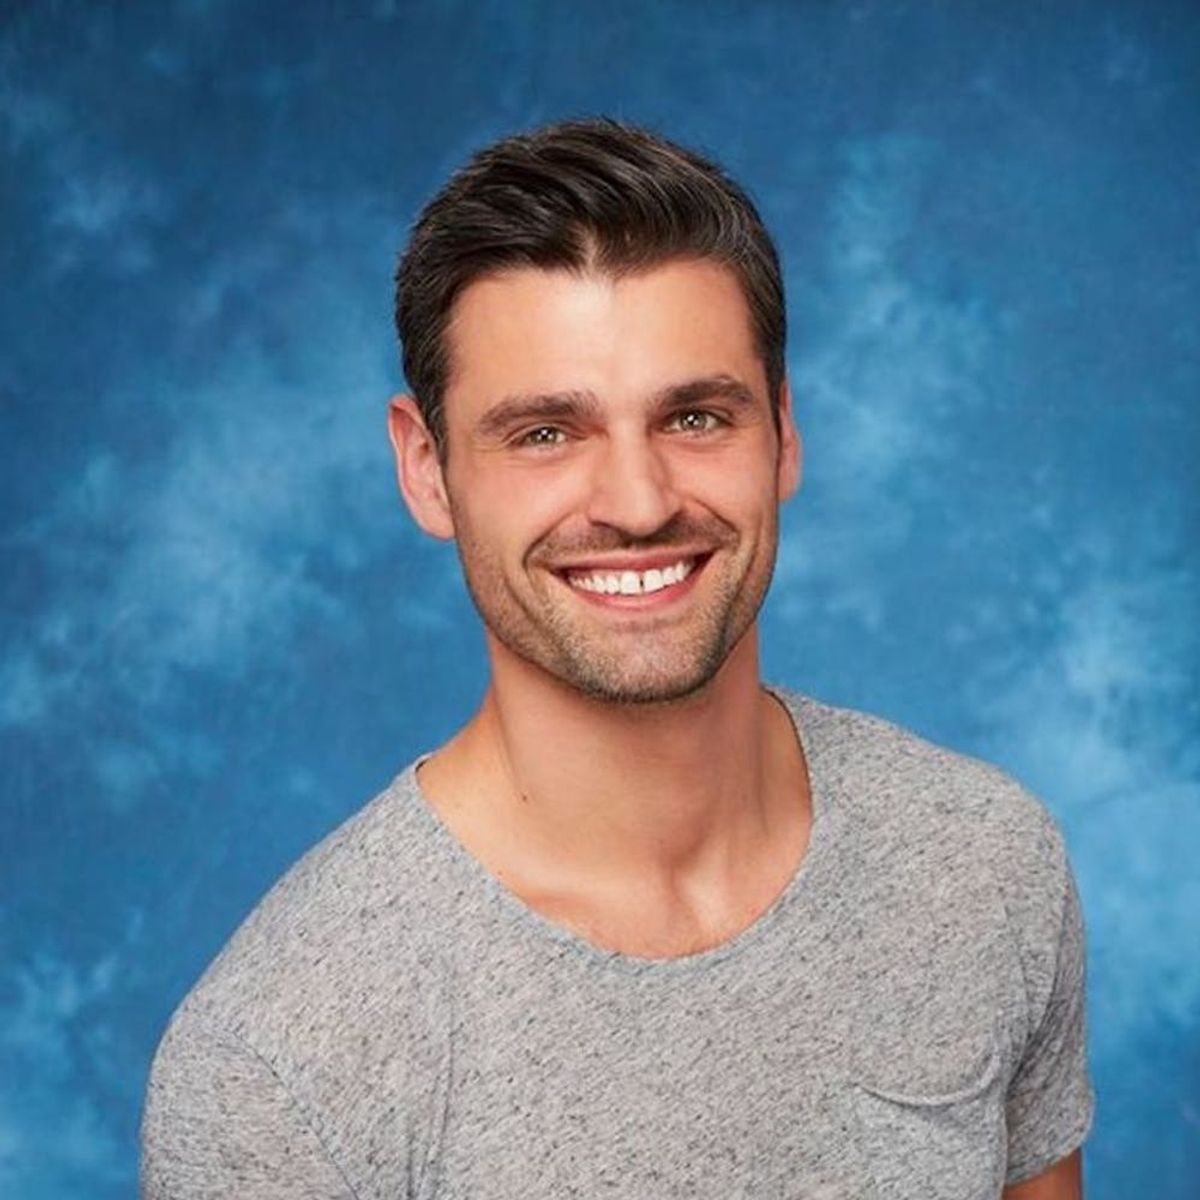 Here’s What Peter Kraus Has to Say About Potentially Becoming the Next Bachelor